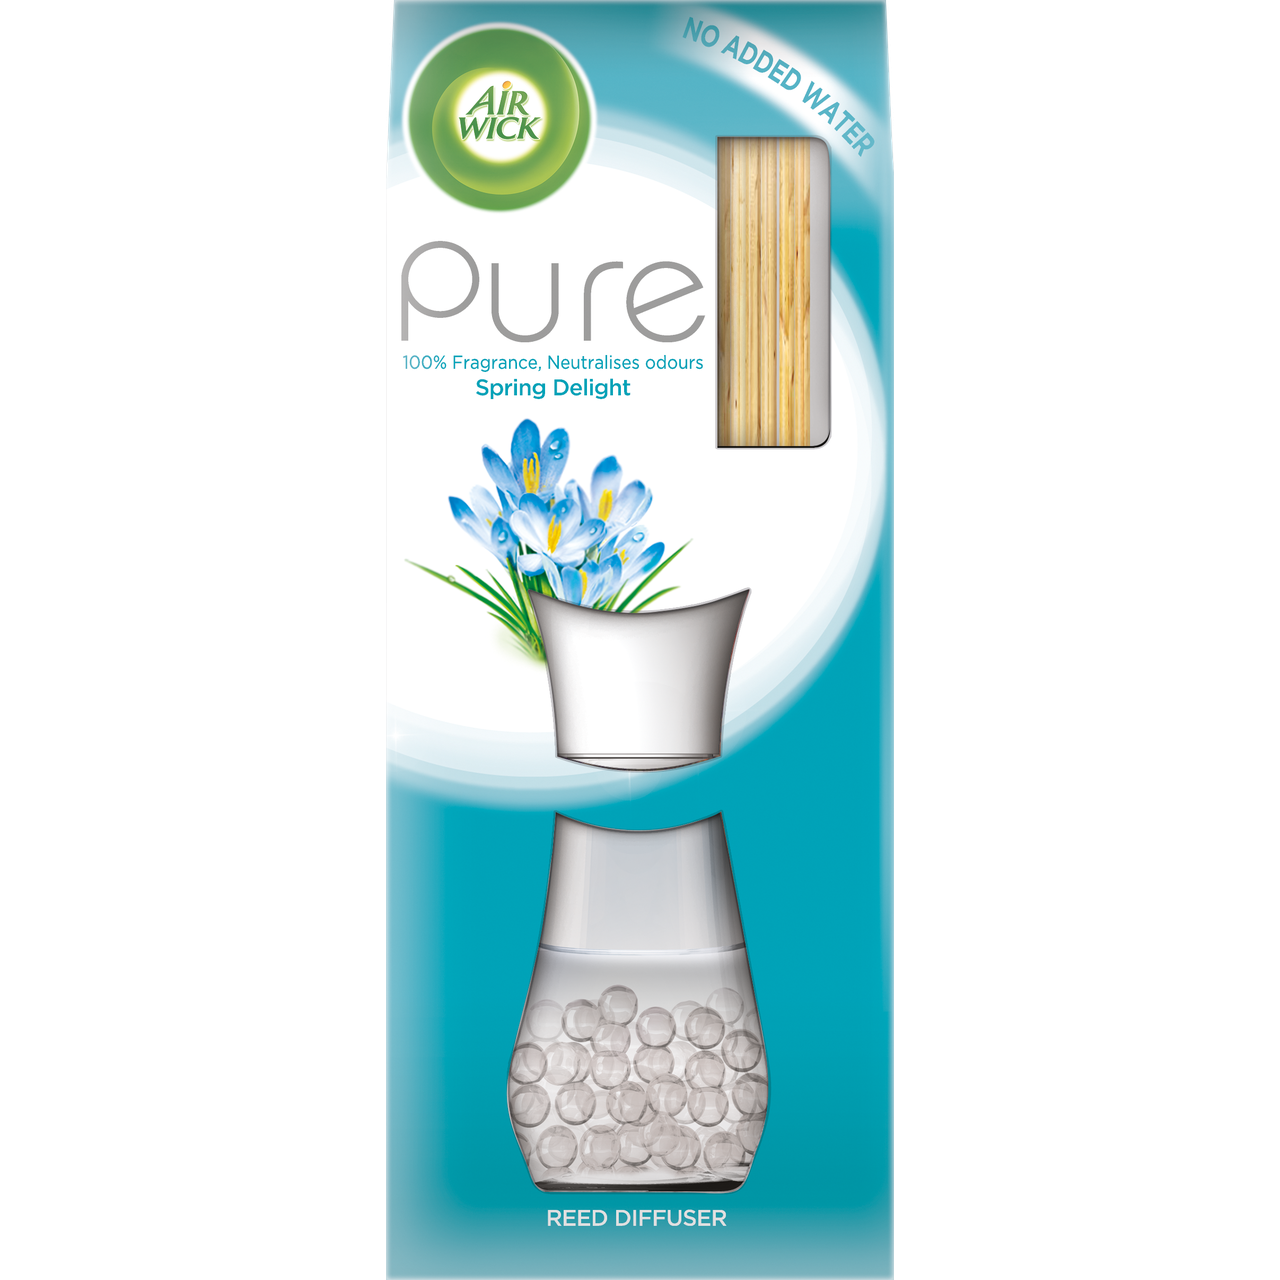 AIR WICK REED DIFFUSER Spring Delight